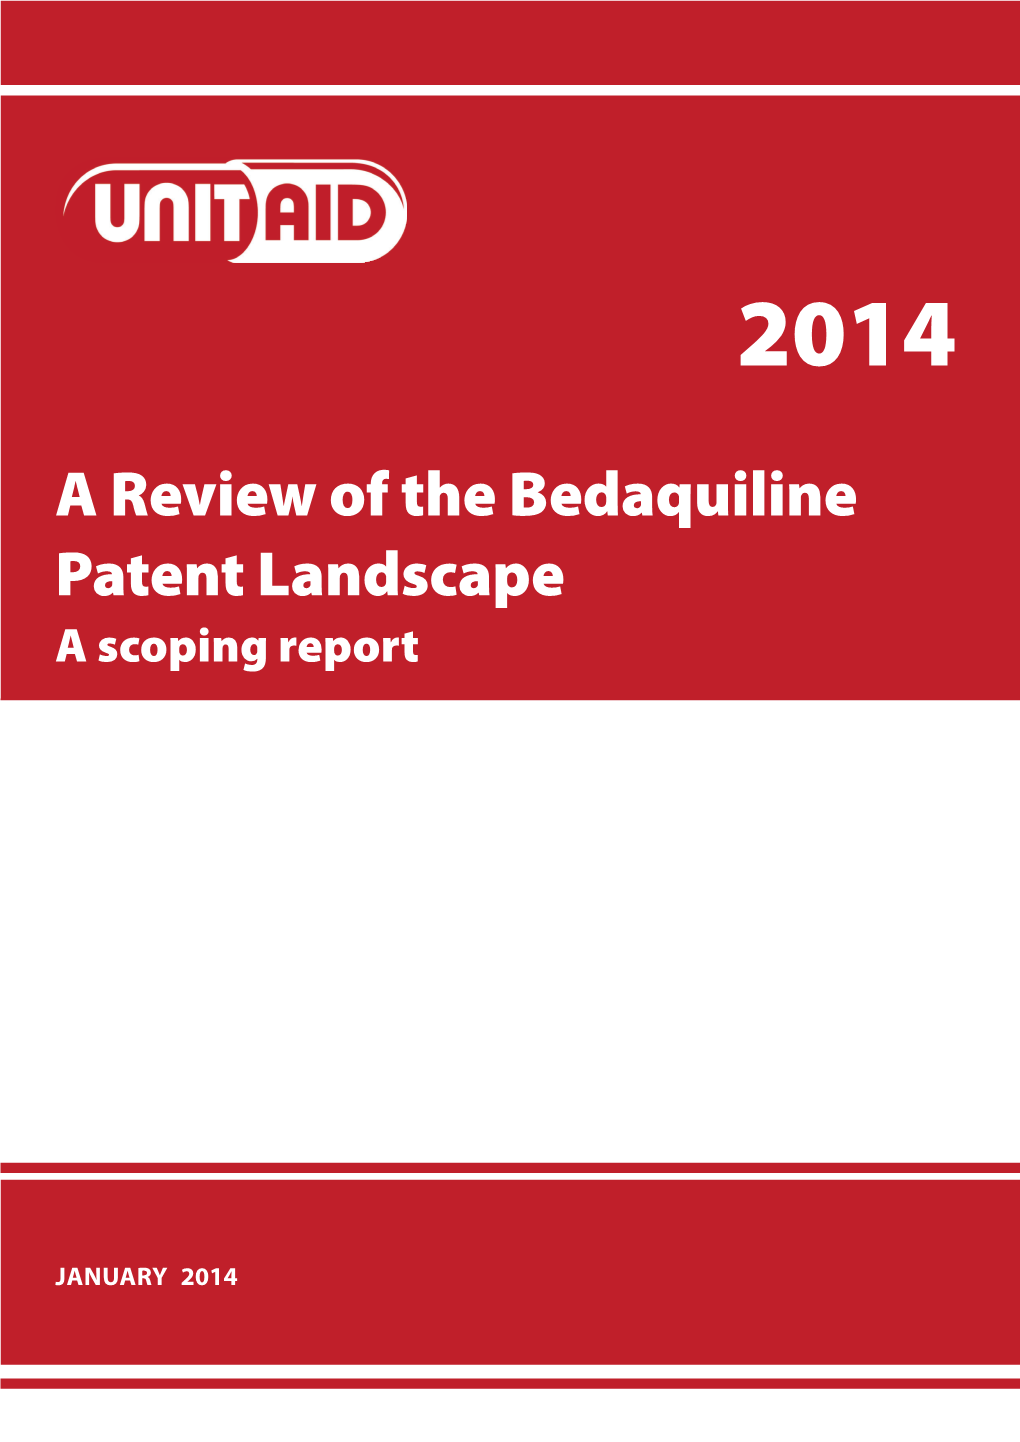 A Review of the Bedaquiline Patent Landscape a Scoping Report